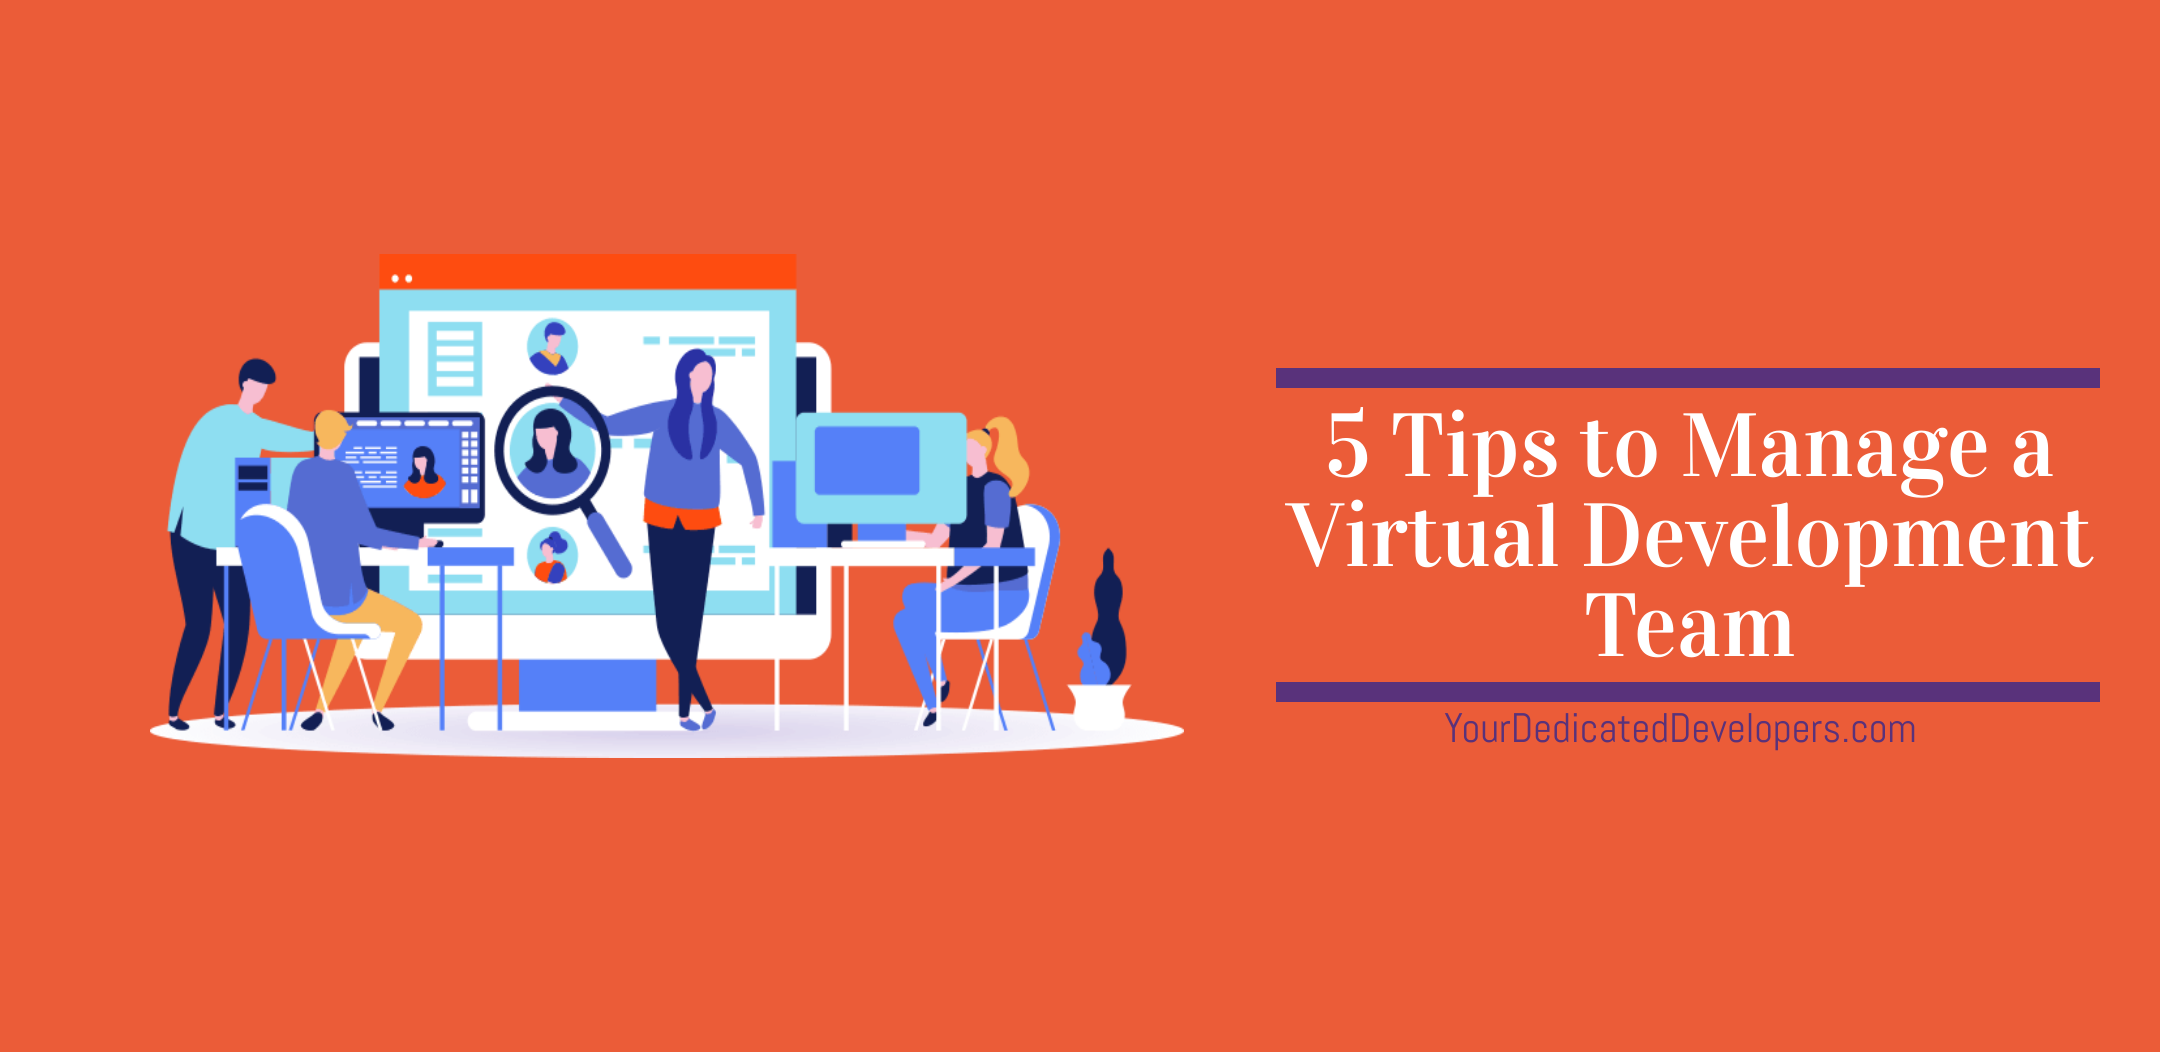 Your Dedicated developers blogs; Tips to Manage a Virtual Development Team